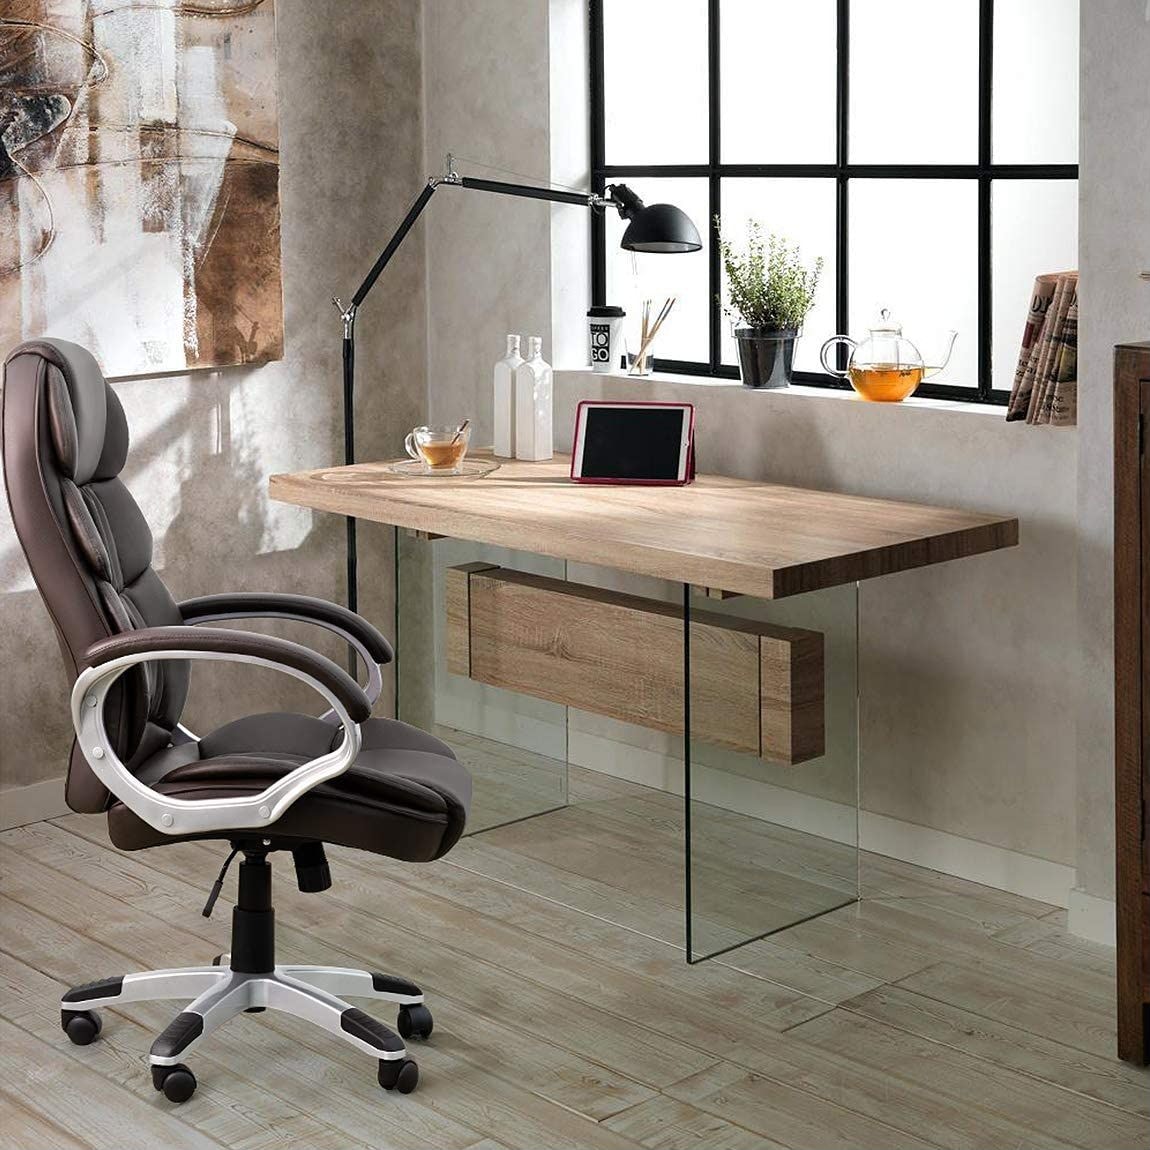 https://ak1.ostkcdn.com/images/products/is/images/direct/e625a2c7721b9d65522c68d4f928f603ca530682/Homall-Office-Chair-High-Back-Computer-Ergonomic-Desk-Chair-PU-Leather-Adjustable-Height-Modern-Executive-Swivel-Task-Chair.jpg